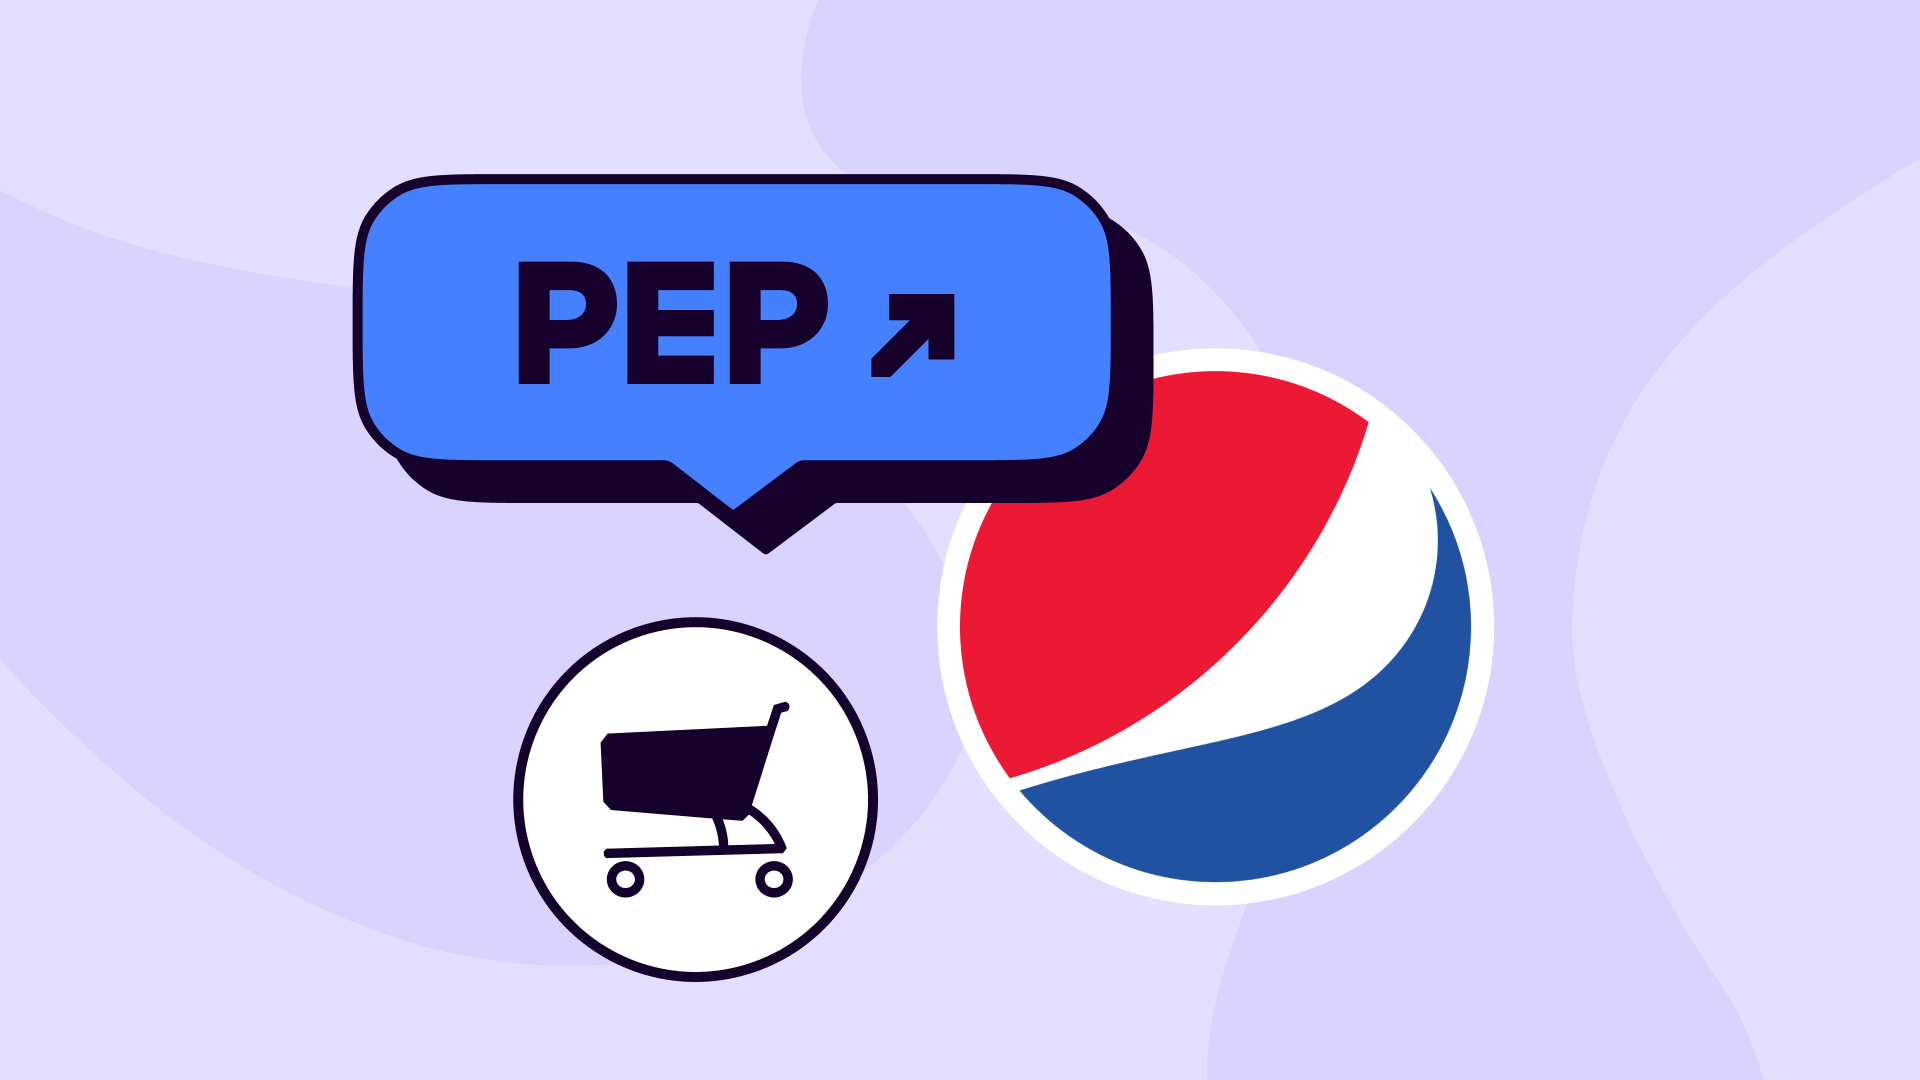 How to buy and sell Pepsi shares